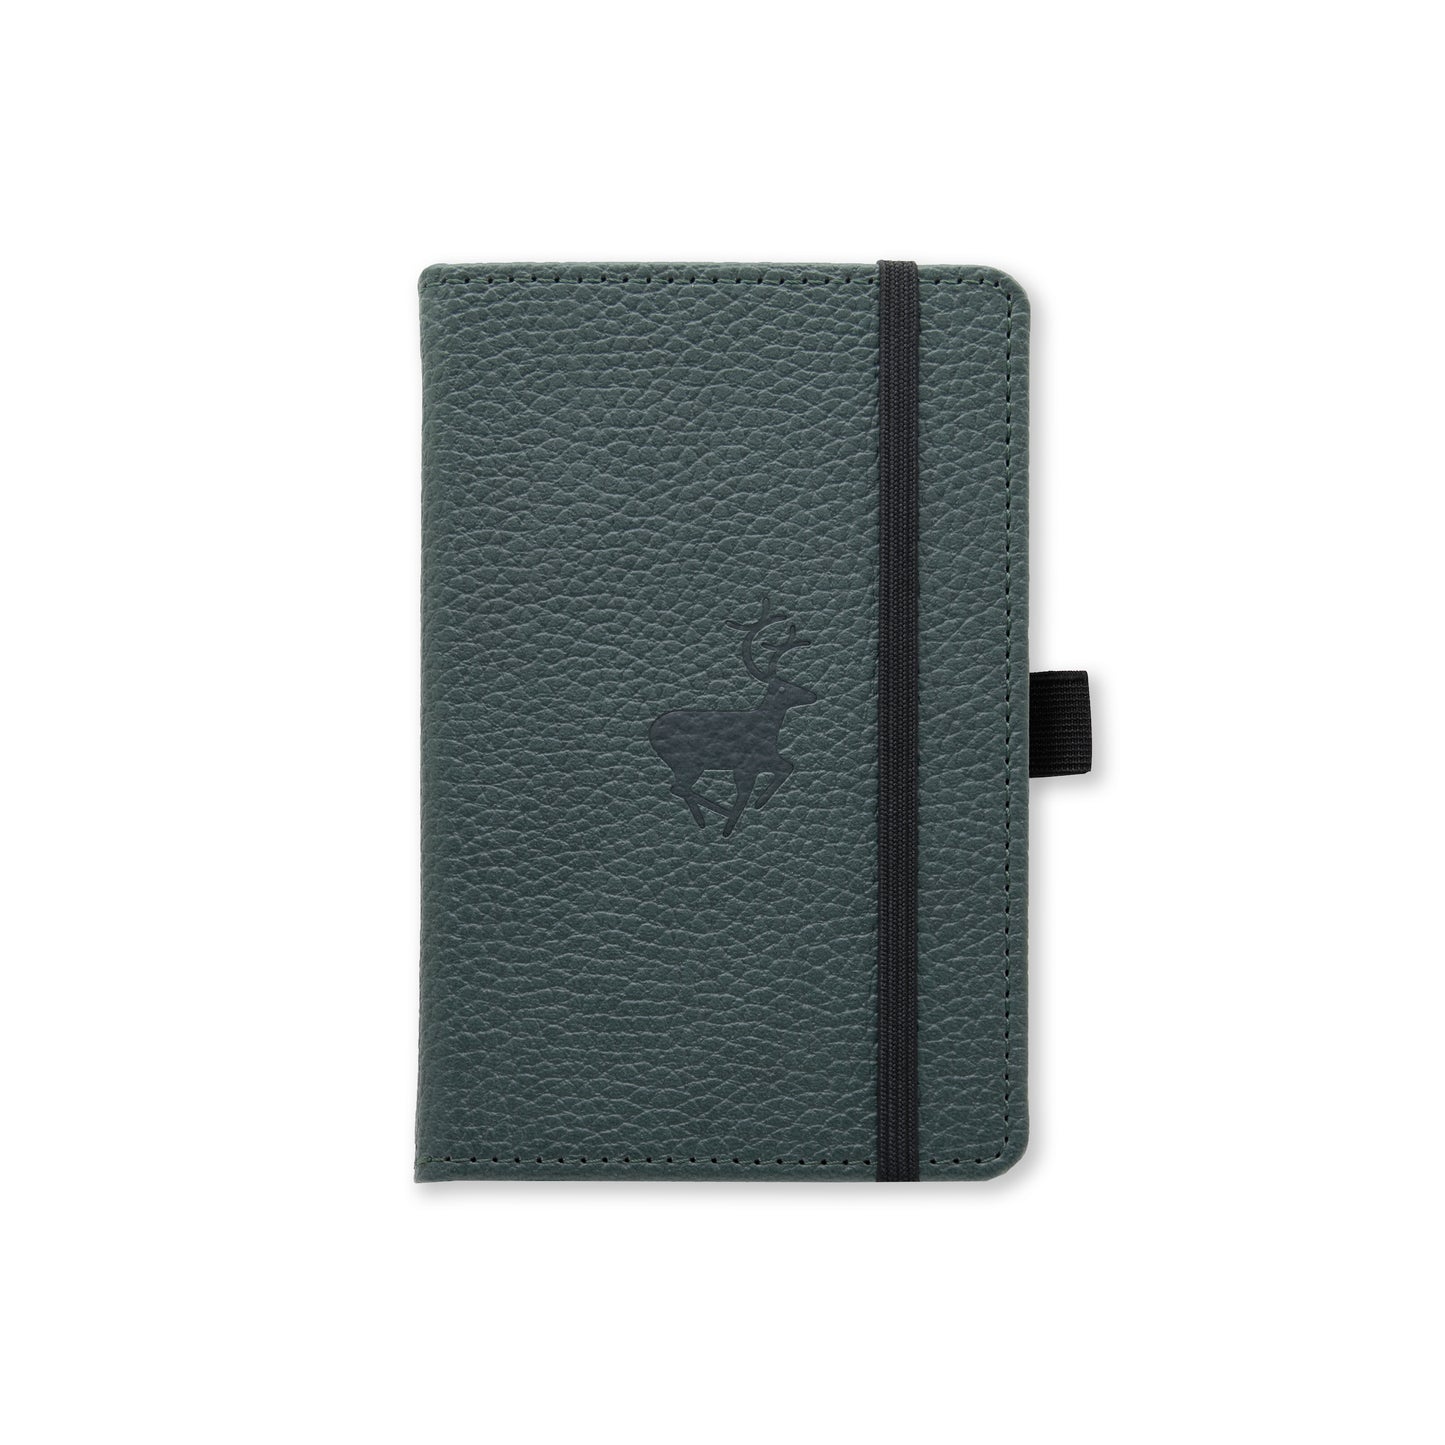 Wildlife Collection A6 Hardcover Notebook